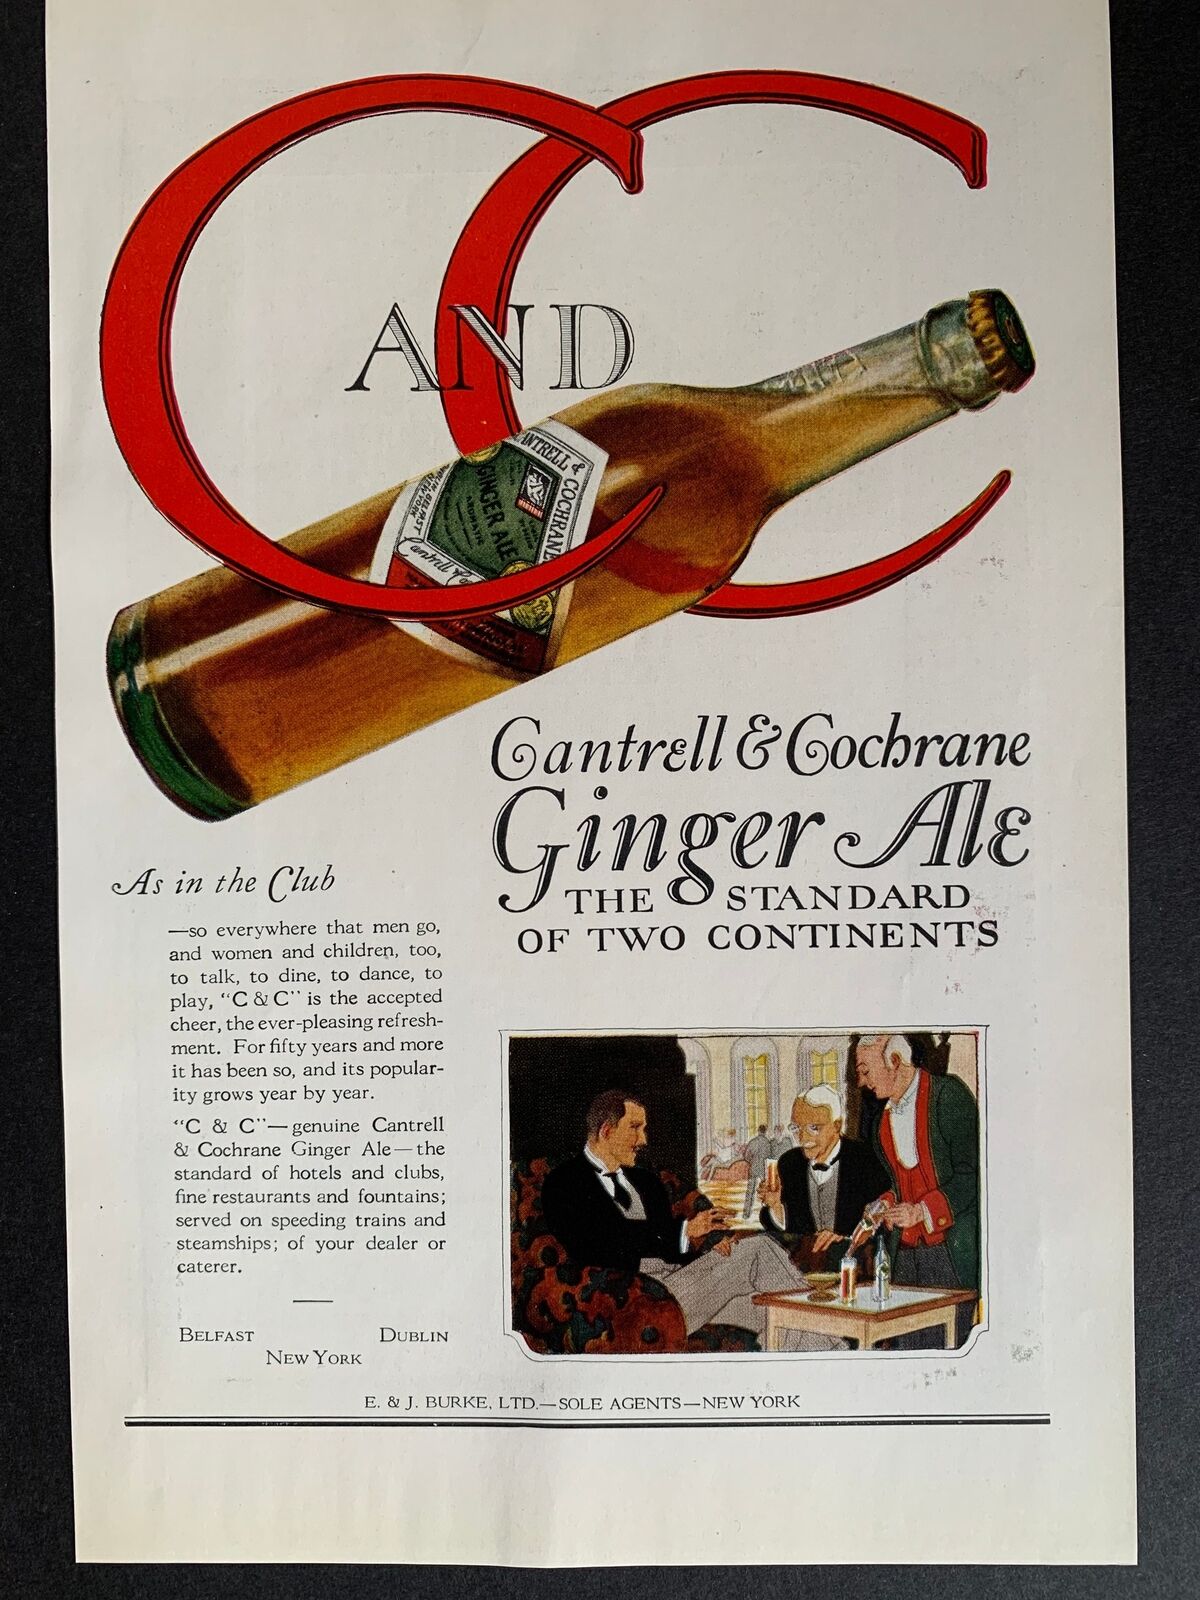 Vintage 1930s Cantrell & Cochrane Ginger Ale Ad